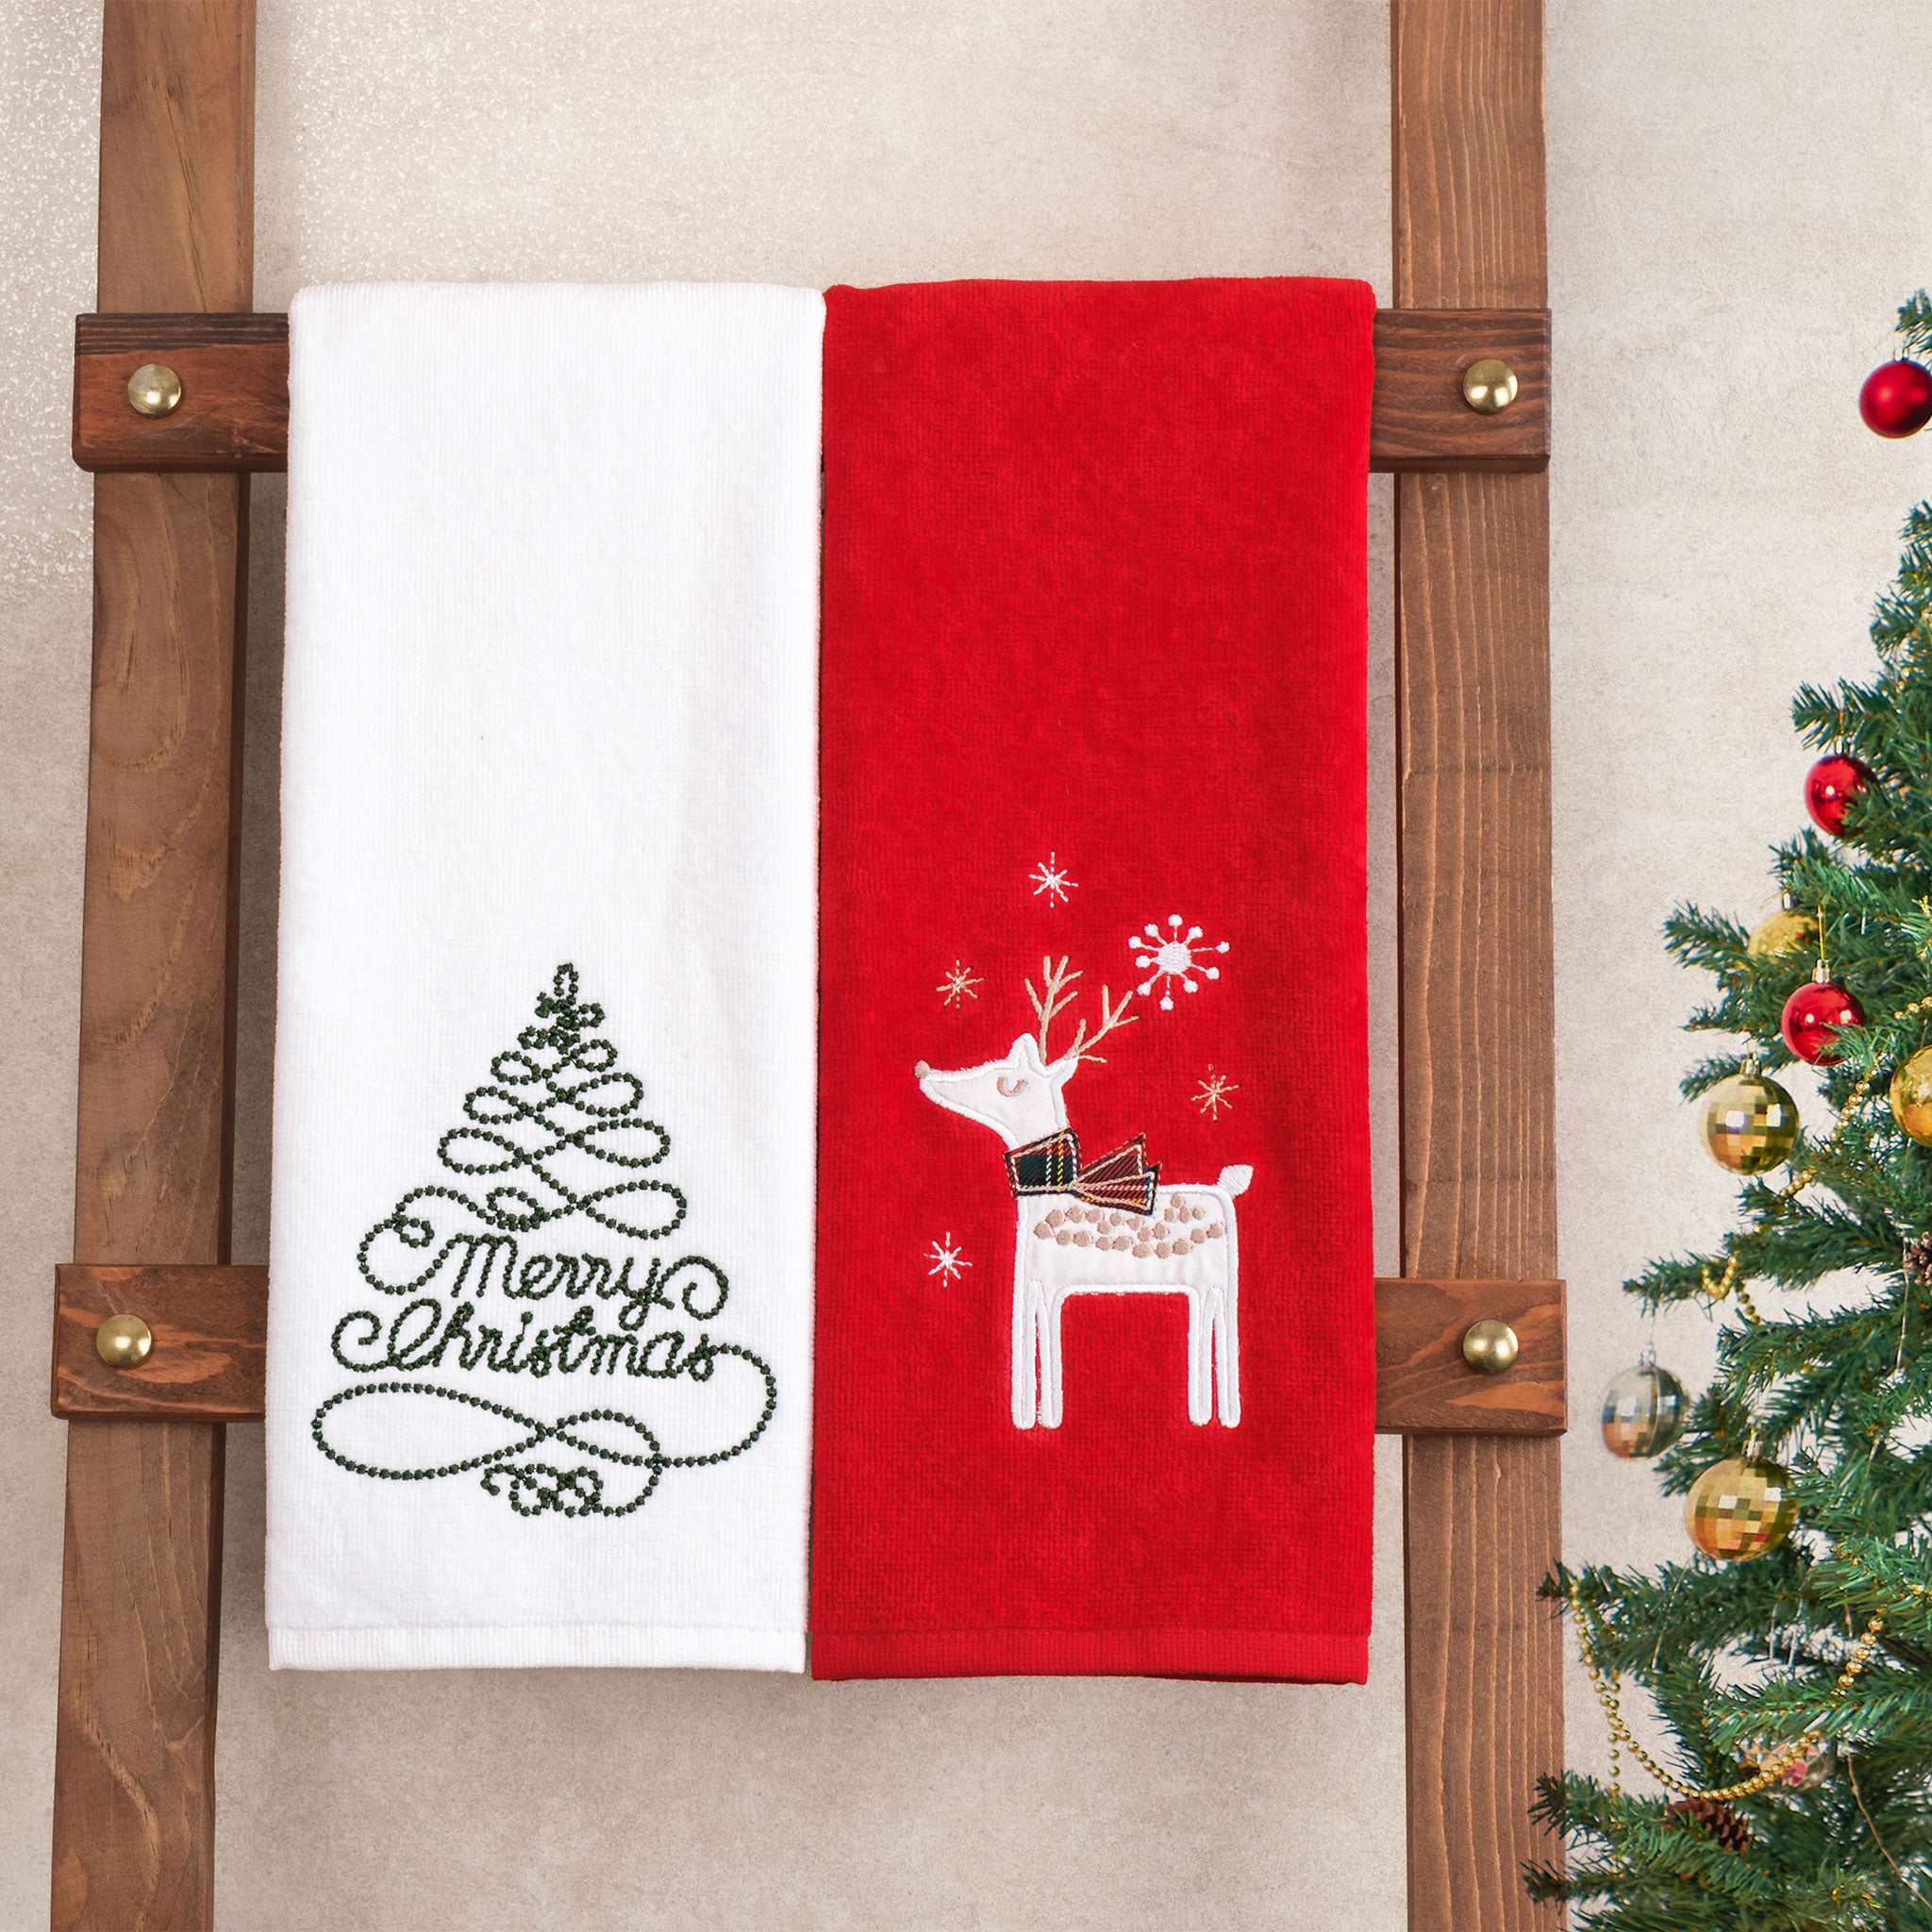 American Soft Linen - Christmas Towels 2 Packed Embroidered Towels for Decor Xmas - Merry Tree-Deery - 2